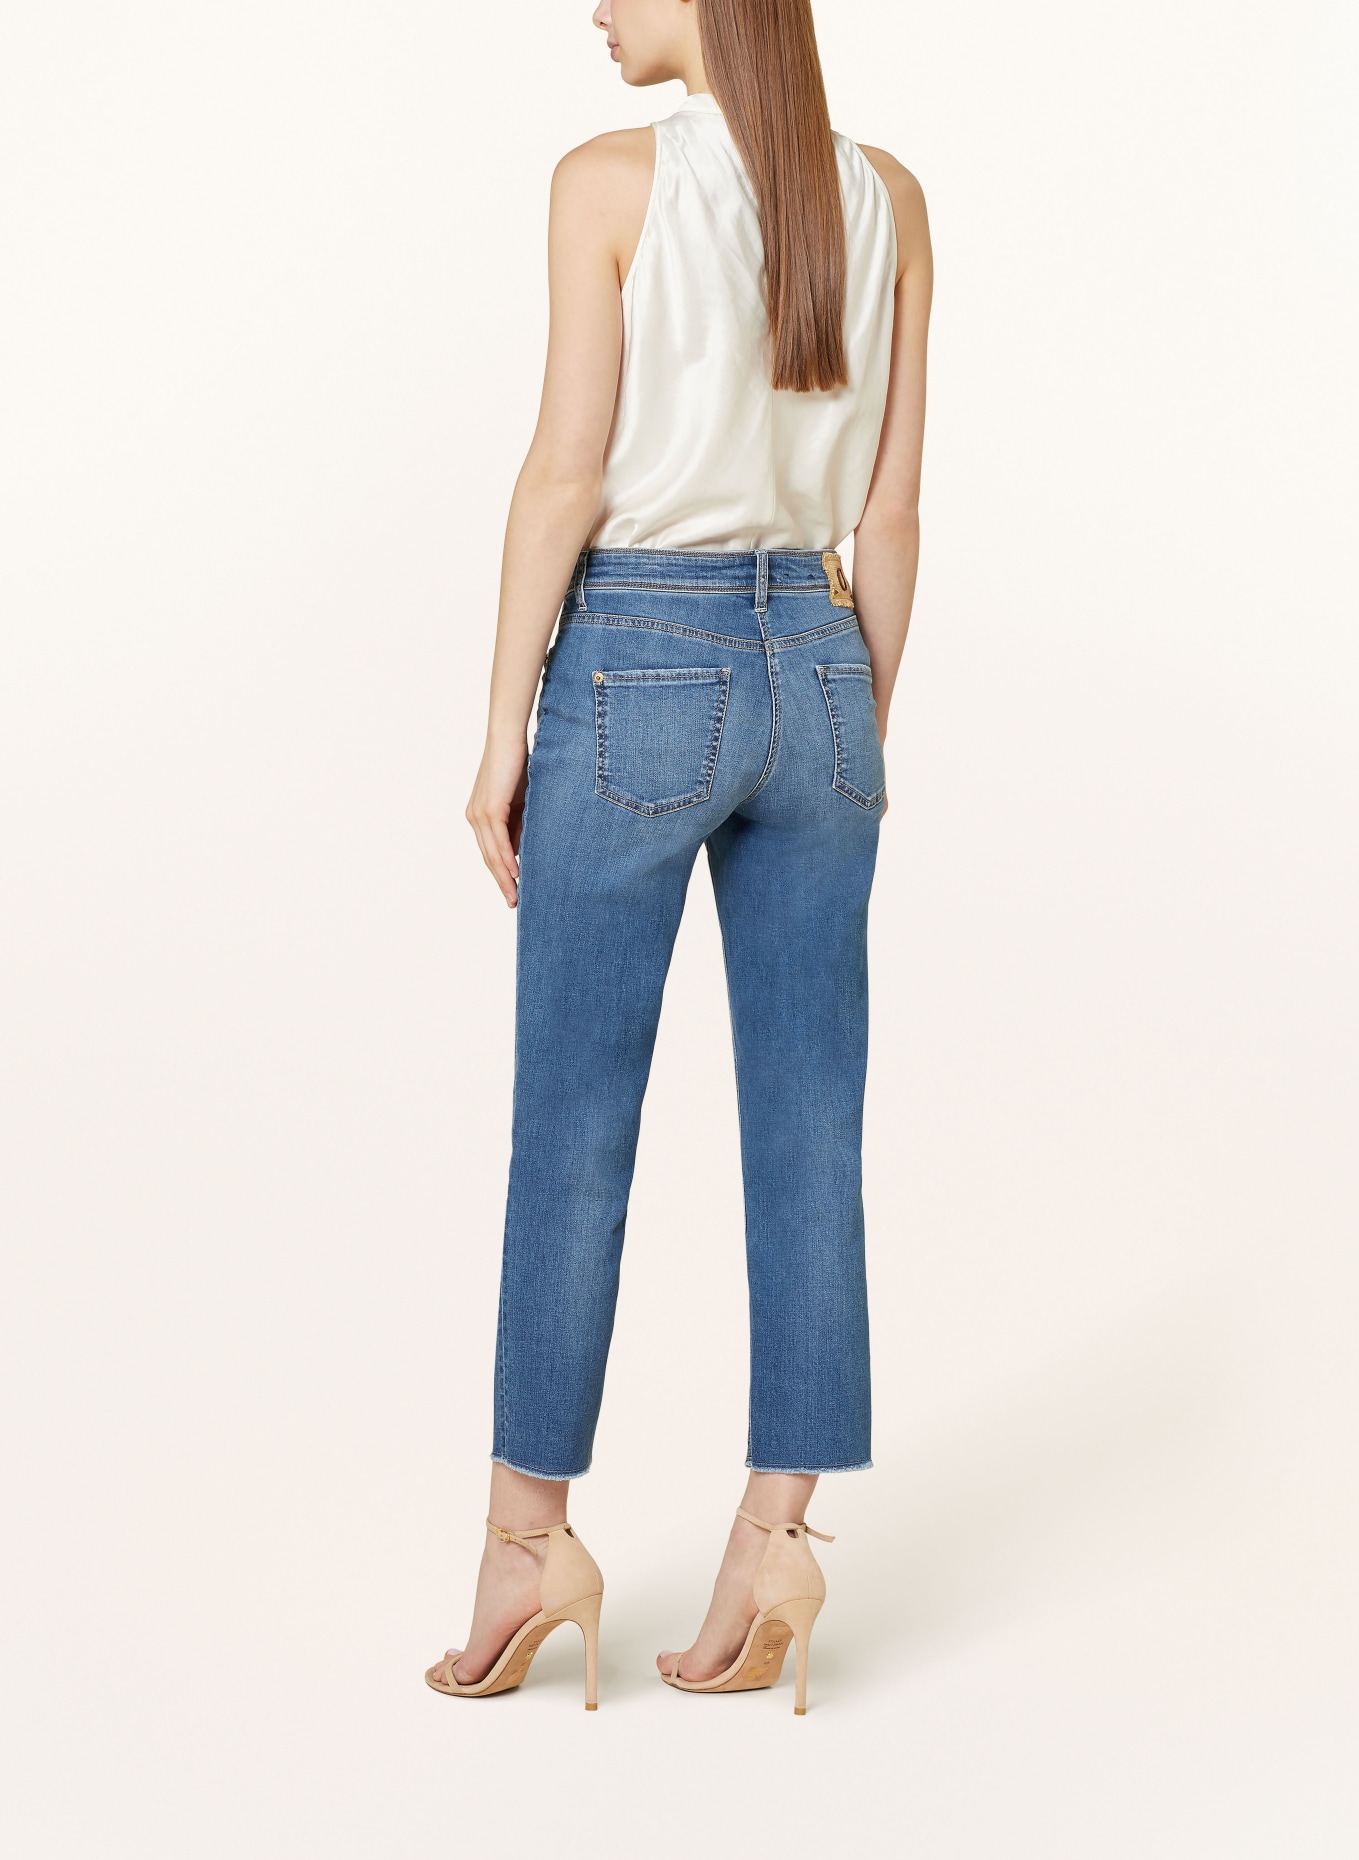 CAMBIO 7/8 jeans PIPER, Color: 5355 summer nights fringed (Image 3)